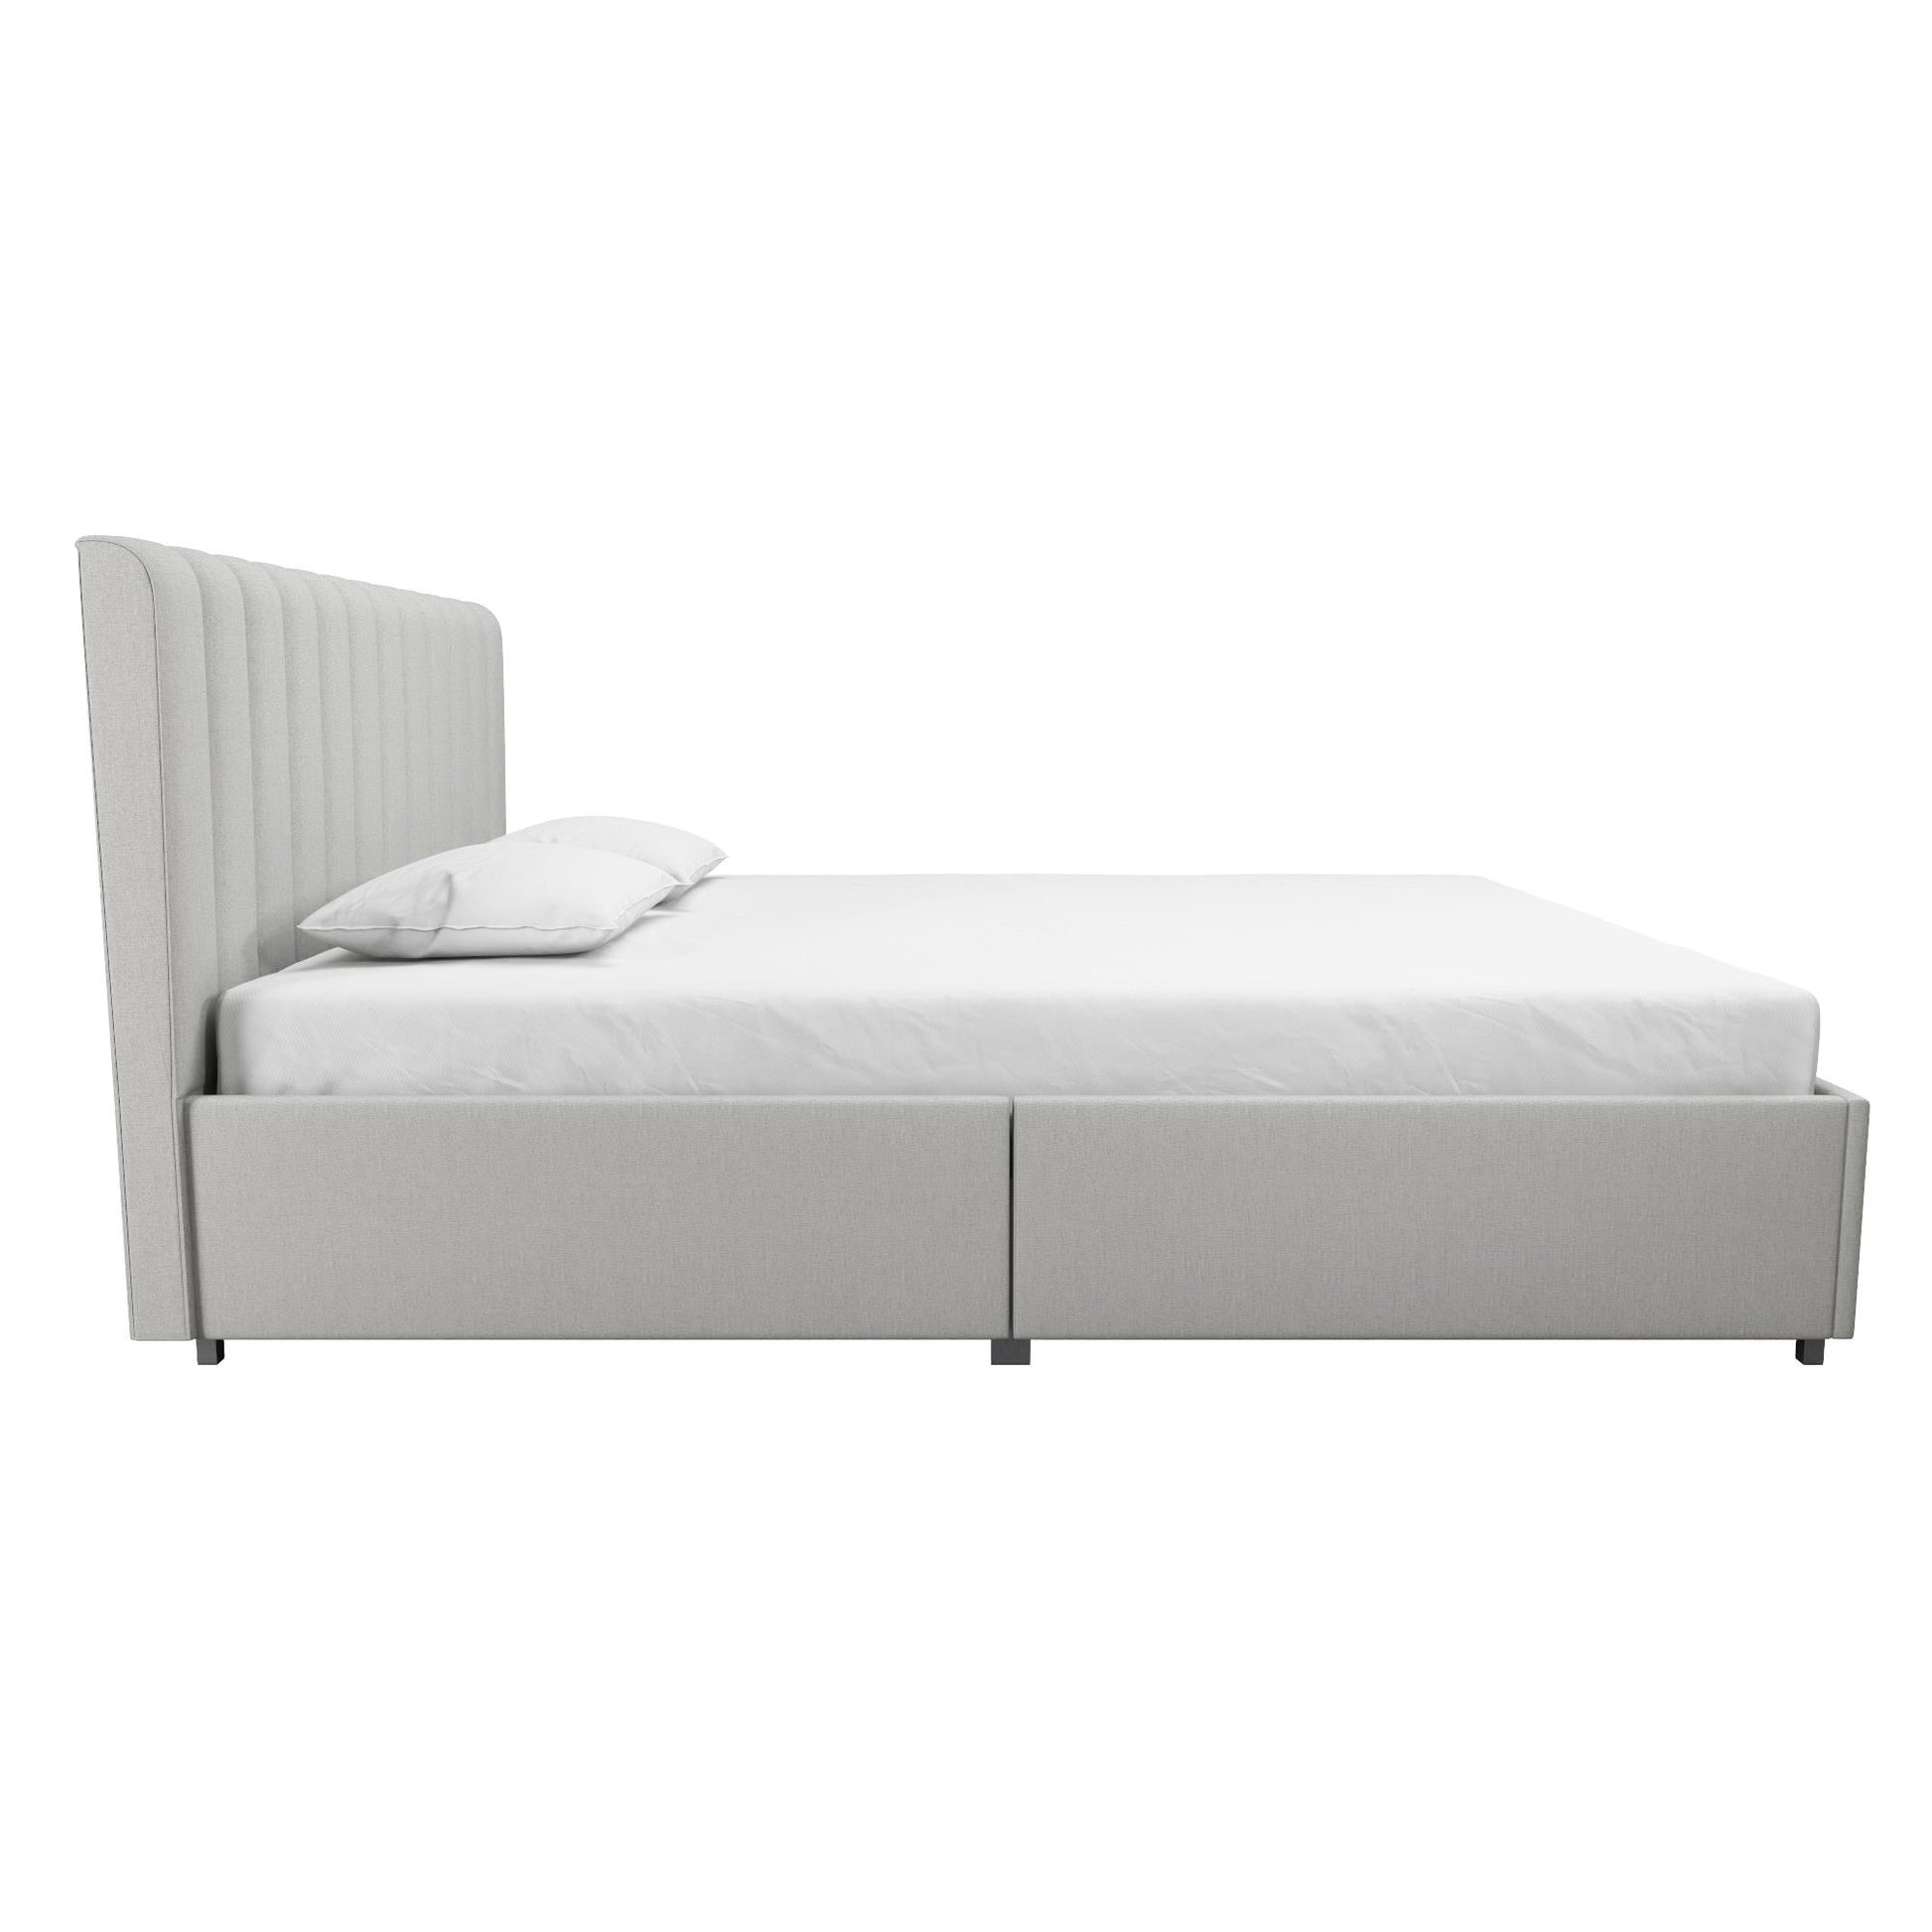 Brittany Upholstered Bed with Storage Drawers - Light Gray - Queen